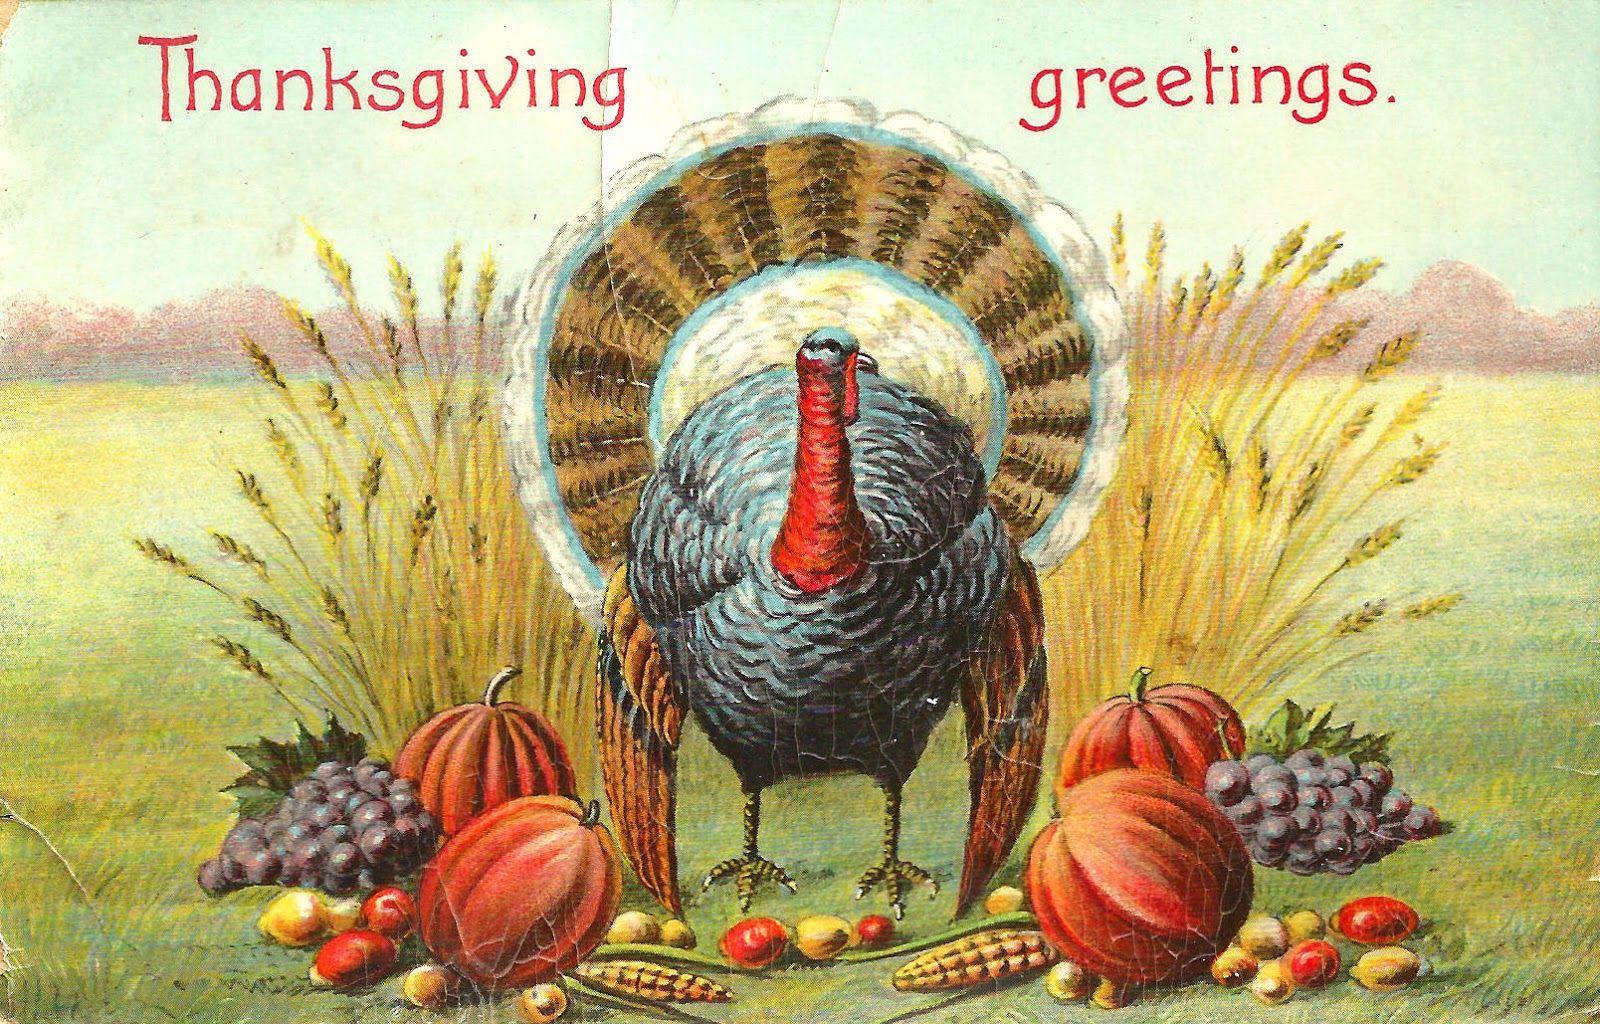 Victorian Thanksgiving Wallpapers - Top Free Victorian Thanksgiving ...